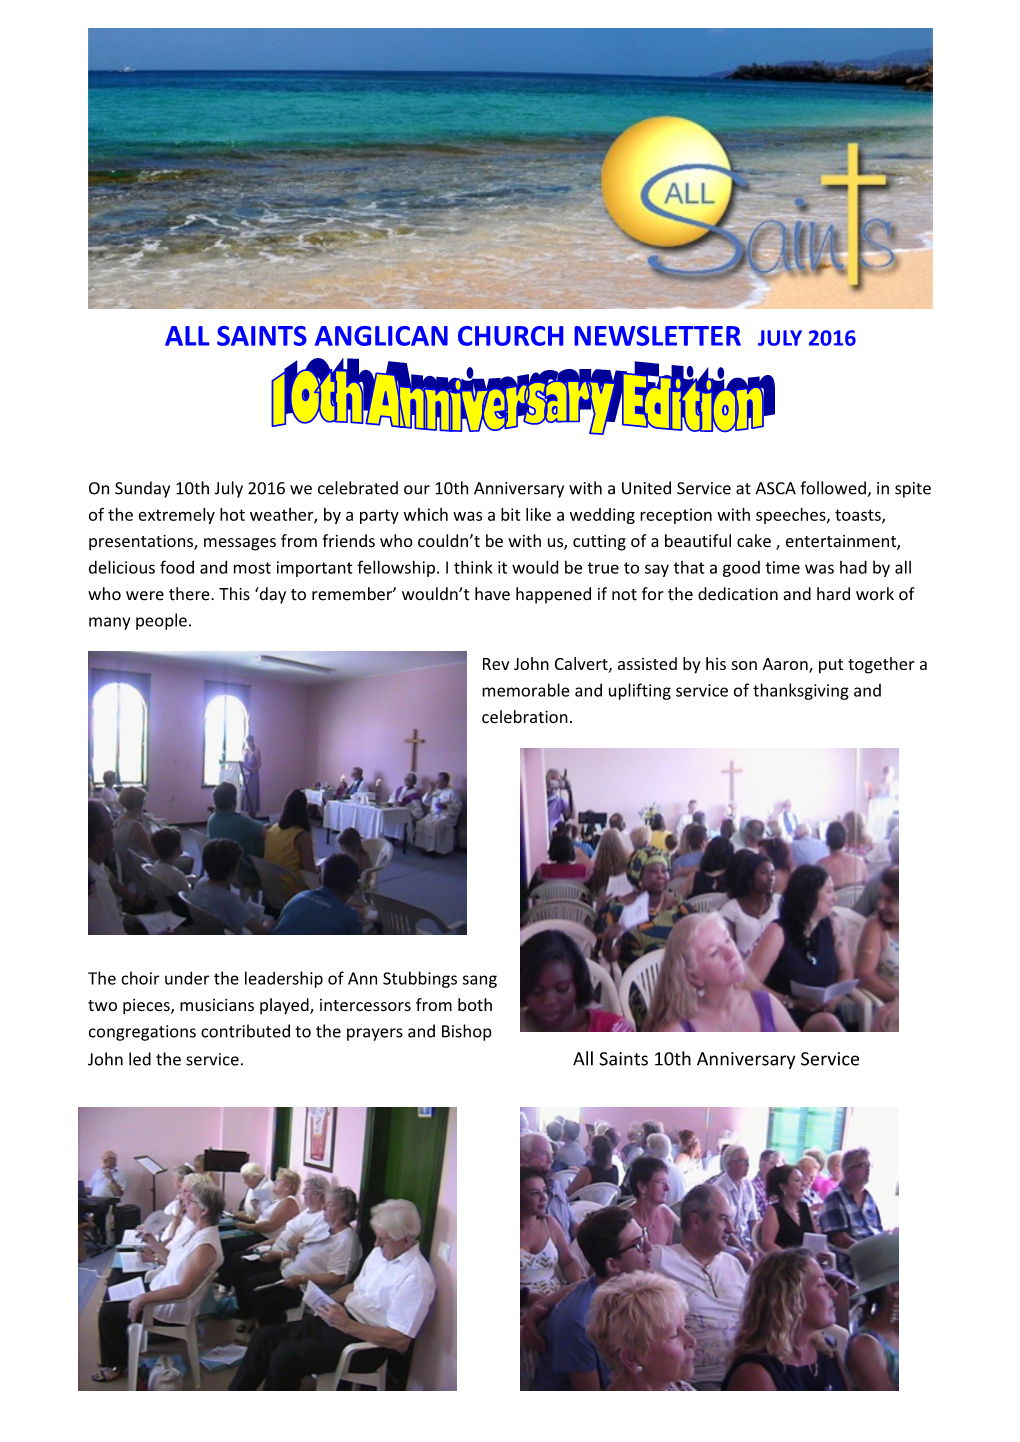 All Saints Anglican Church Newsletter July 2016